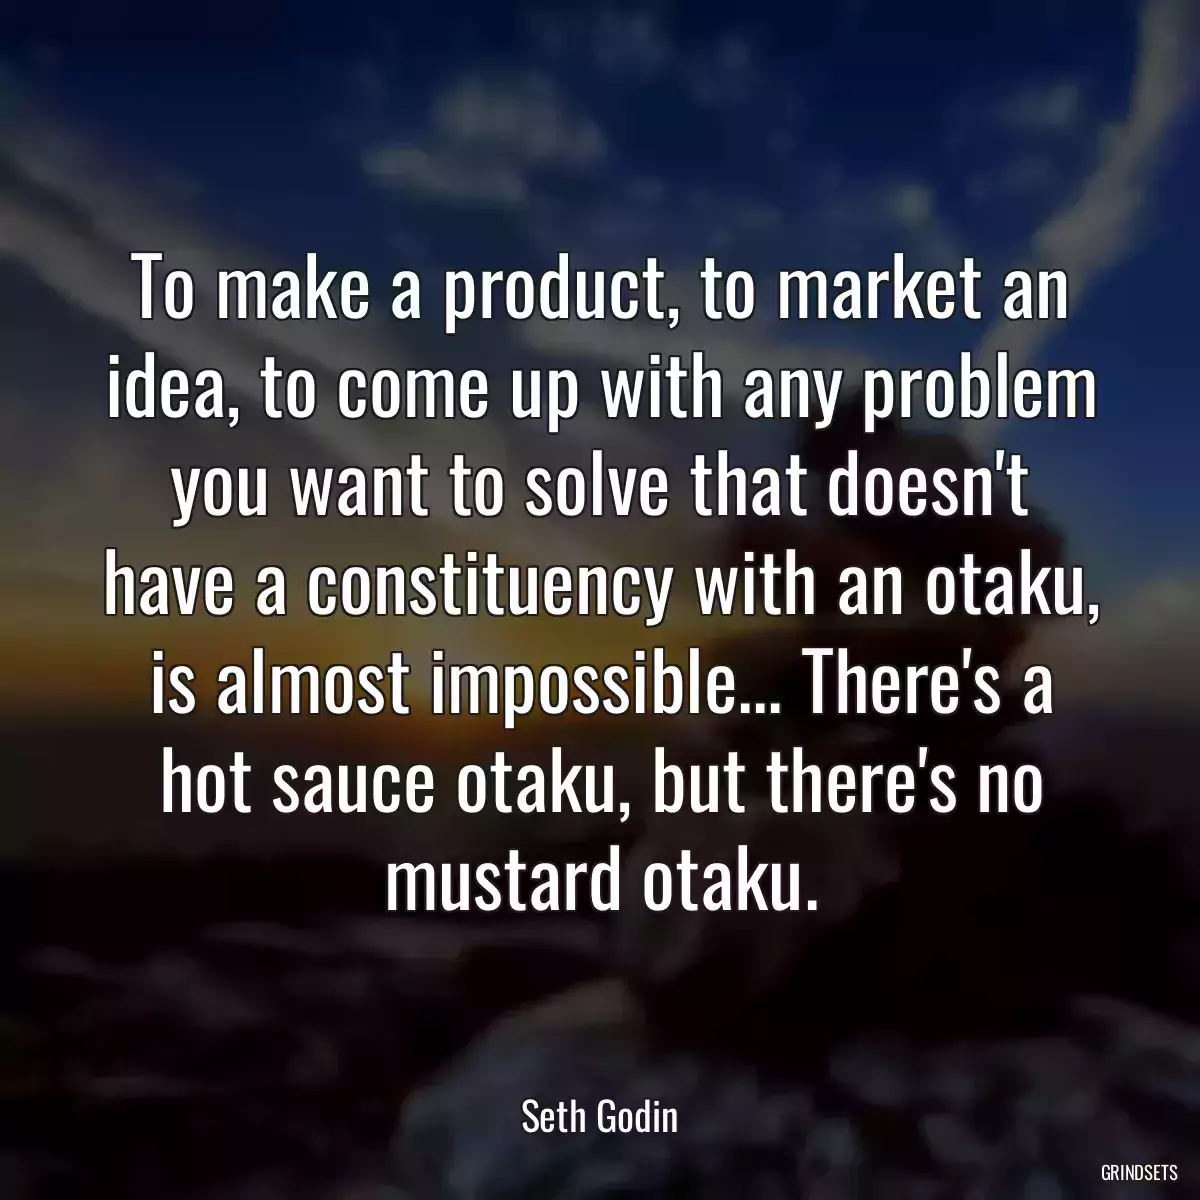 To make a product, to market an idea, to come up with any problem you want to solve that doesn\'t have a constituency with an otaku, is almost impossible... There\'s a hot sauce otaku, but there\'s no mustard otaku.